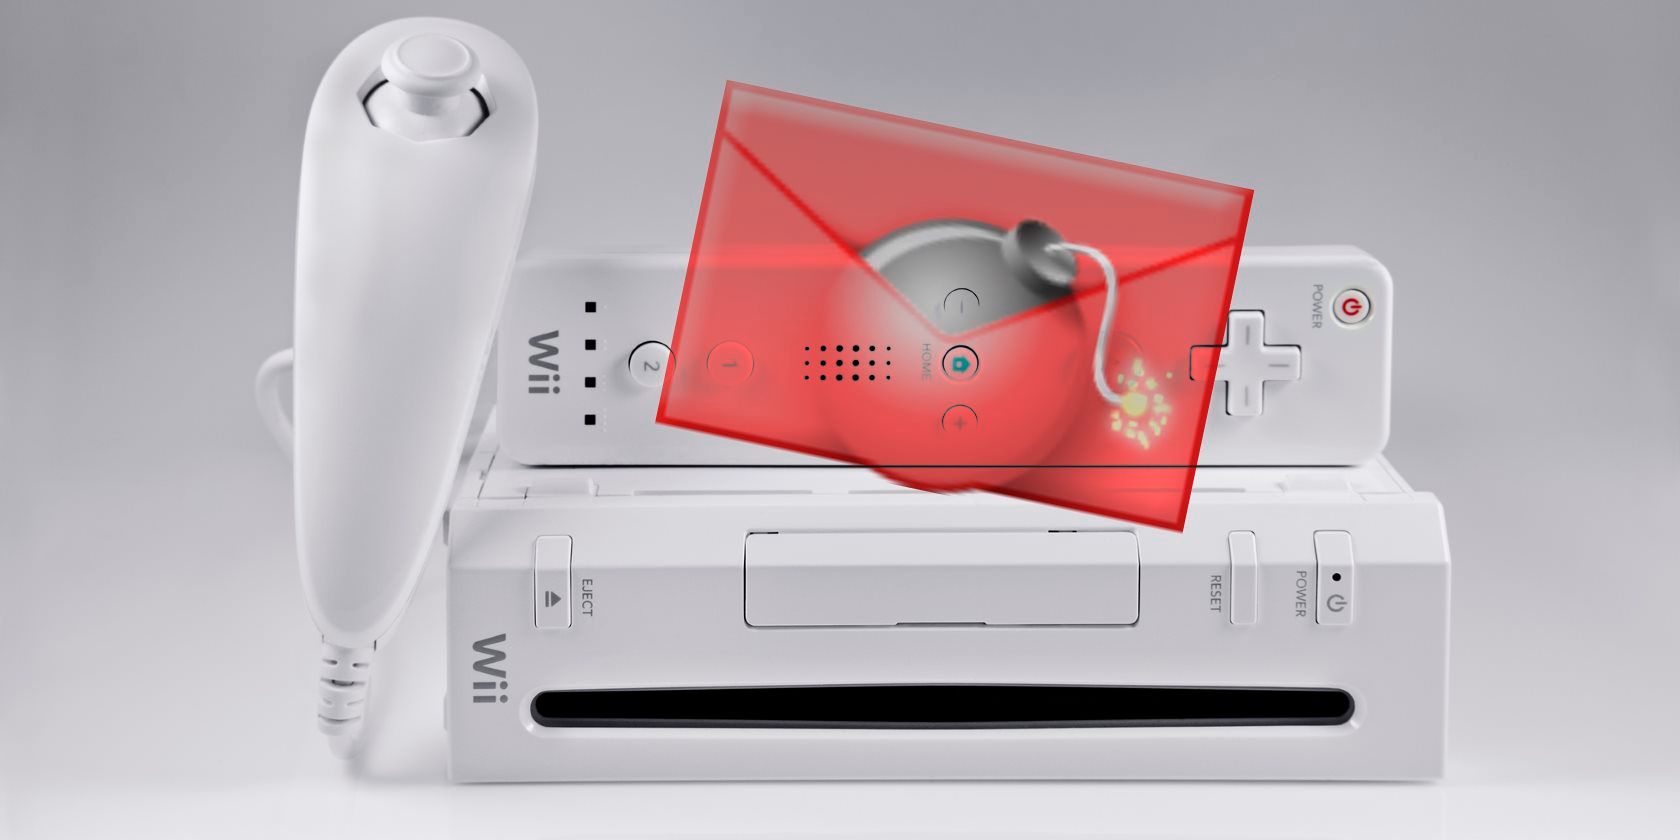 Correspondentie plaats blik How to Install Homebrew on a Nintendo Wii Using LetterBomb